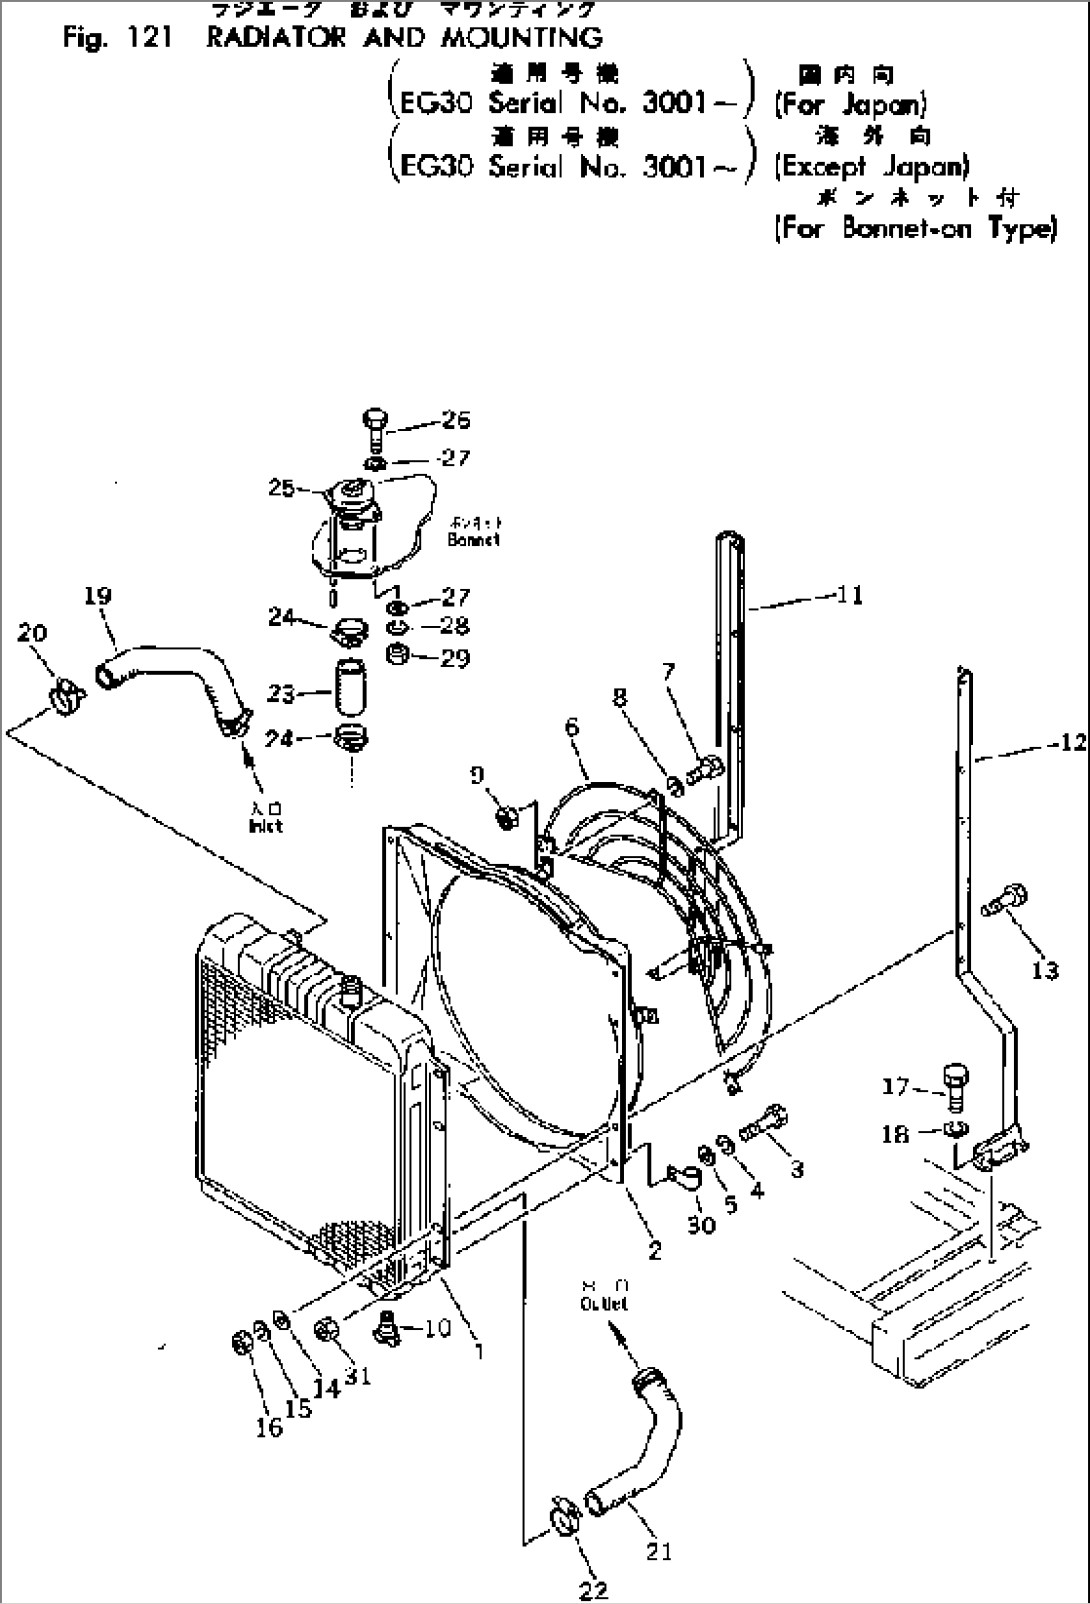 RADIATOR AND MOUNTING (BONNET-ON TYPE)